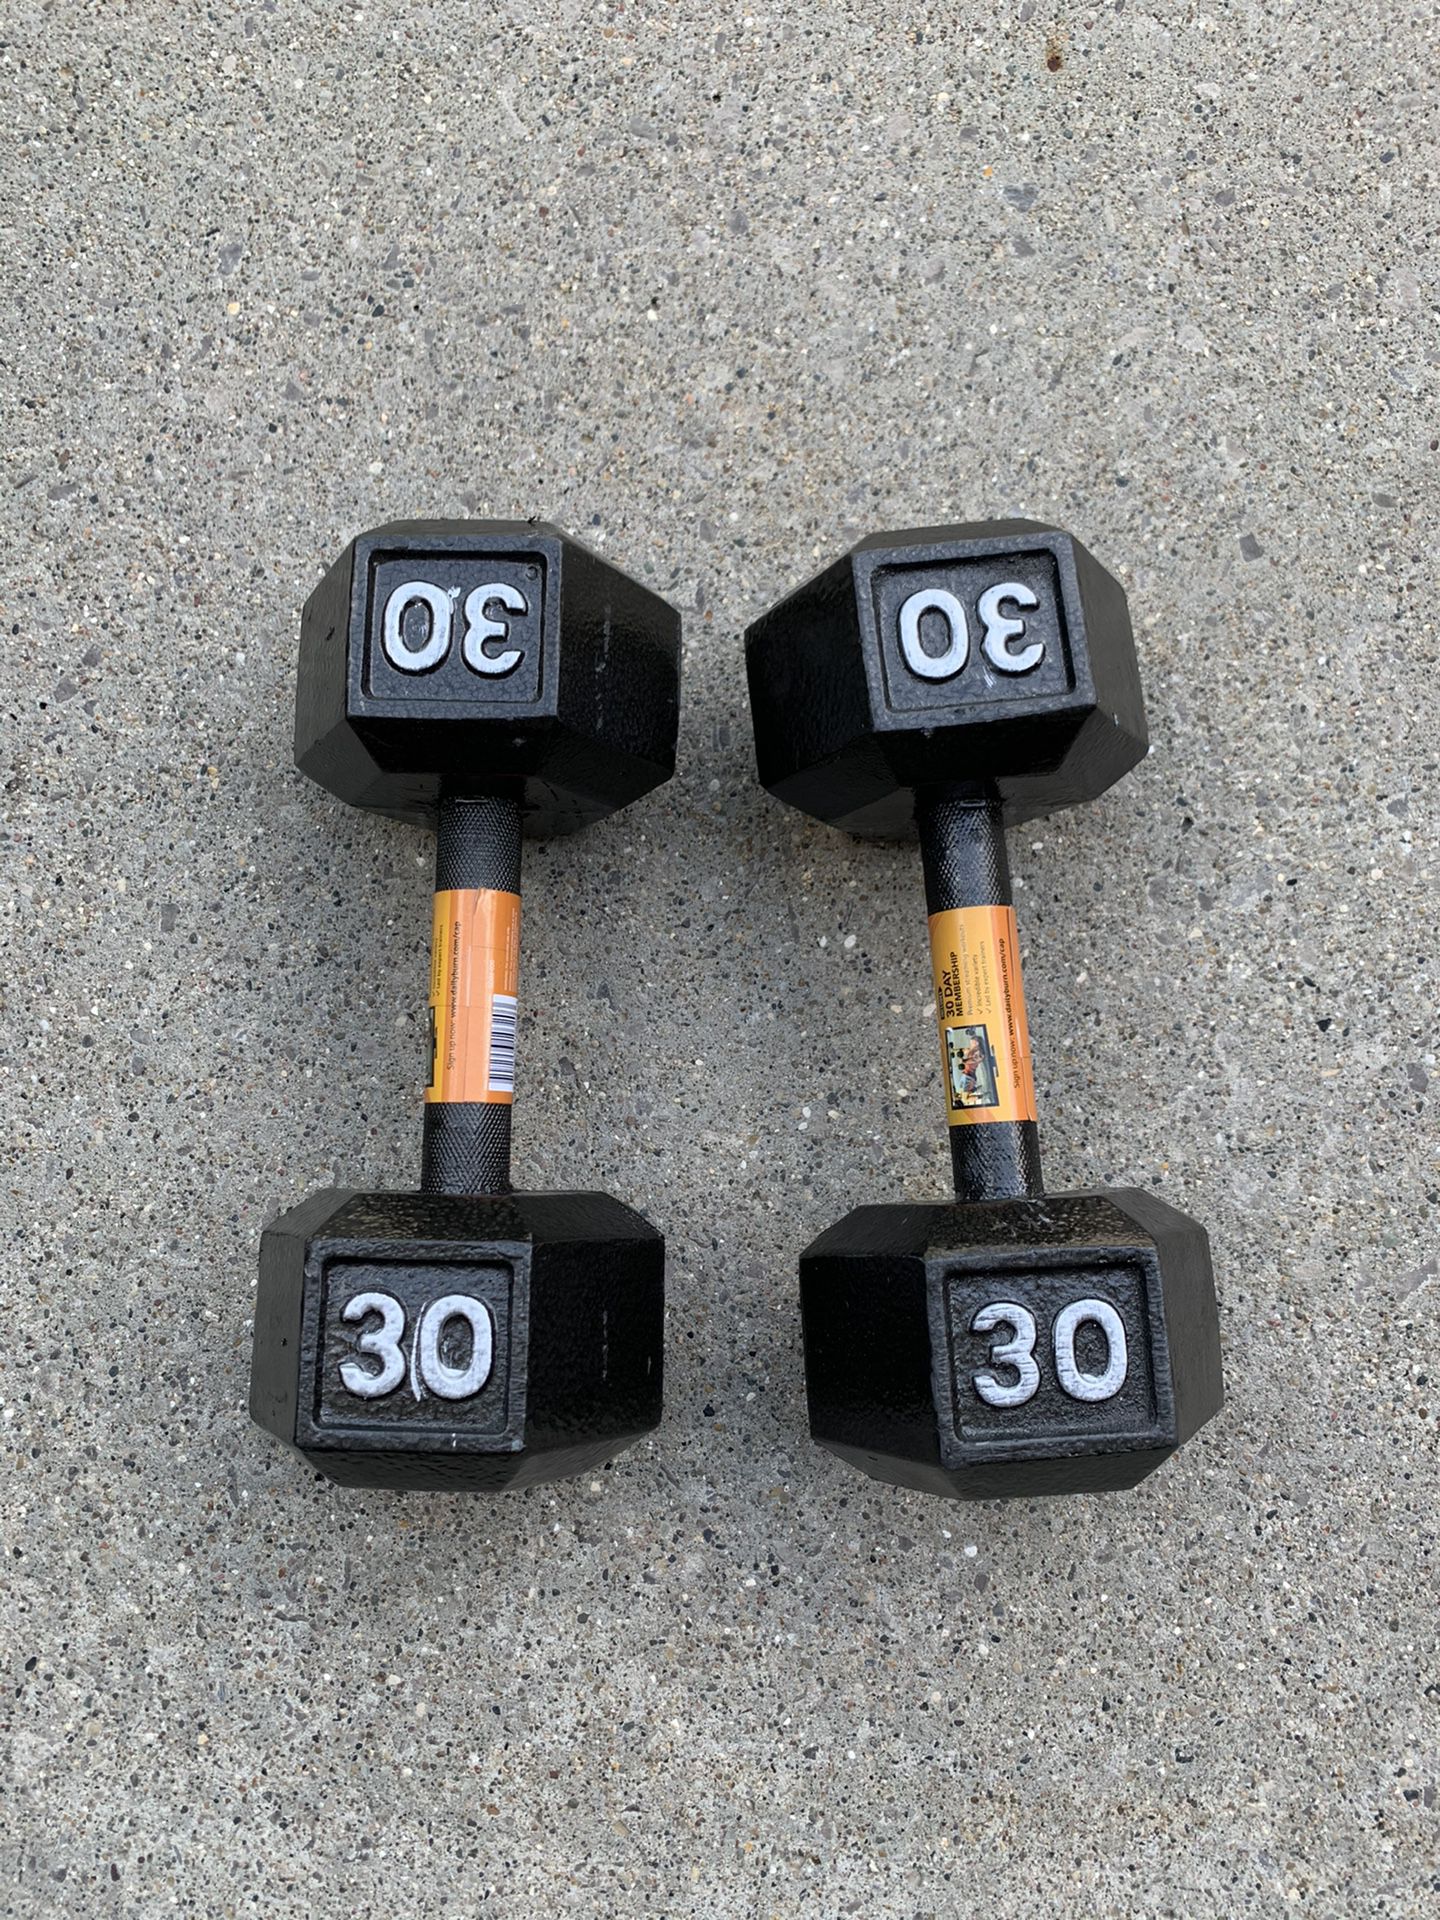 30 LBS DUMBBELL SET price is firm